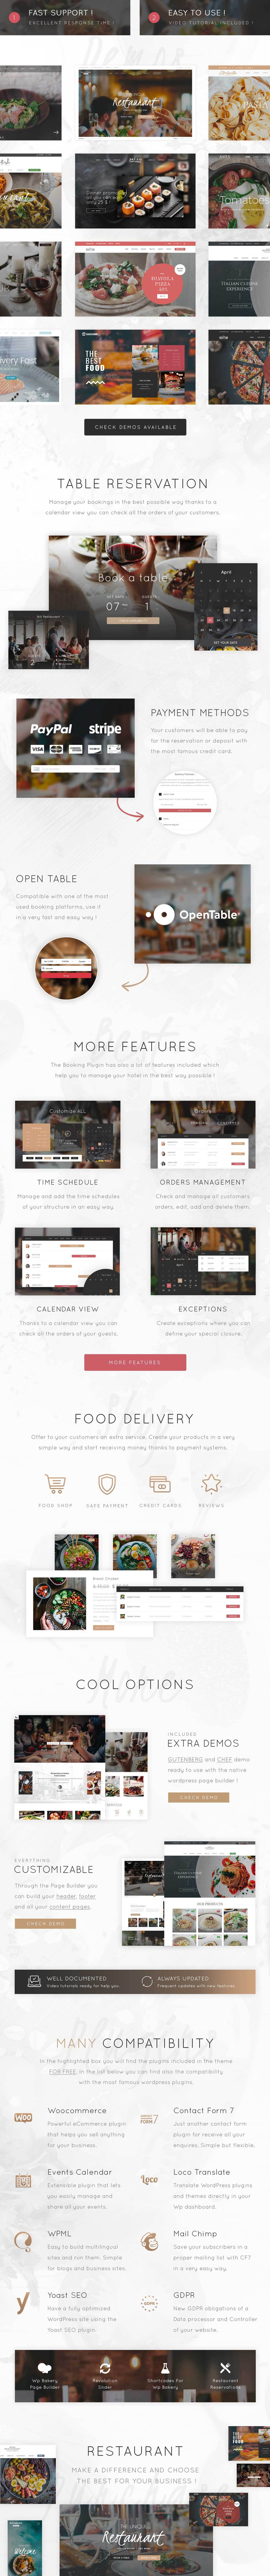 A pack of colorful images of WordPress pages on a restaurant theme.